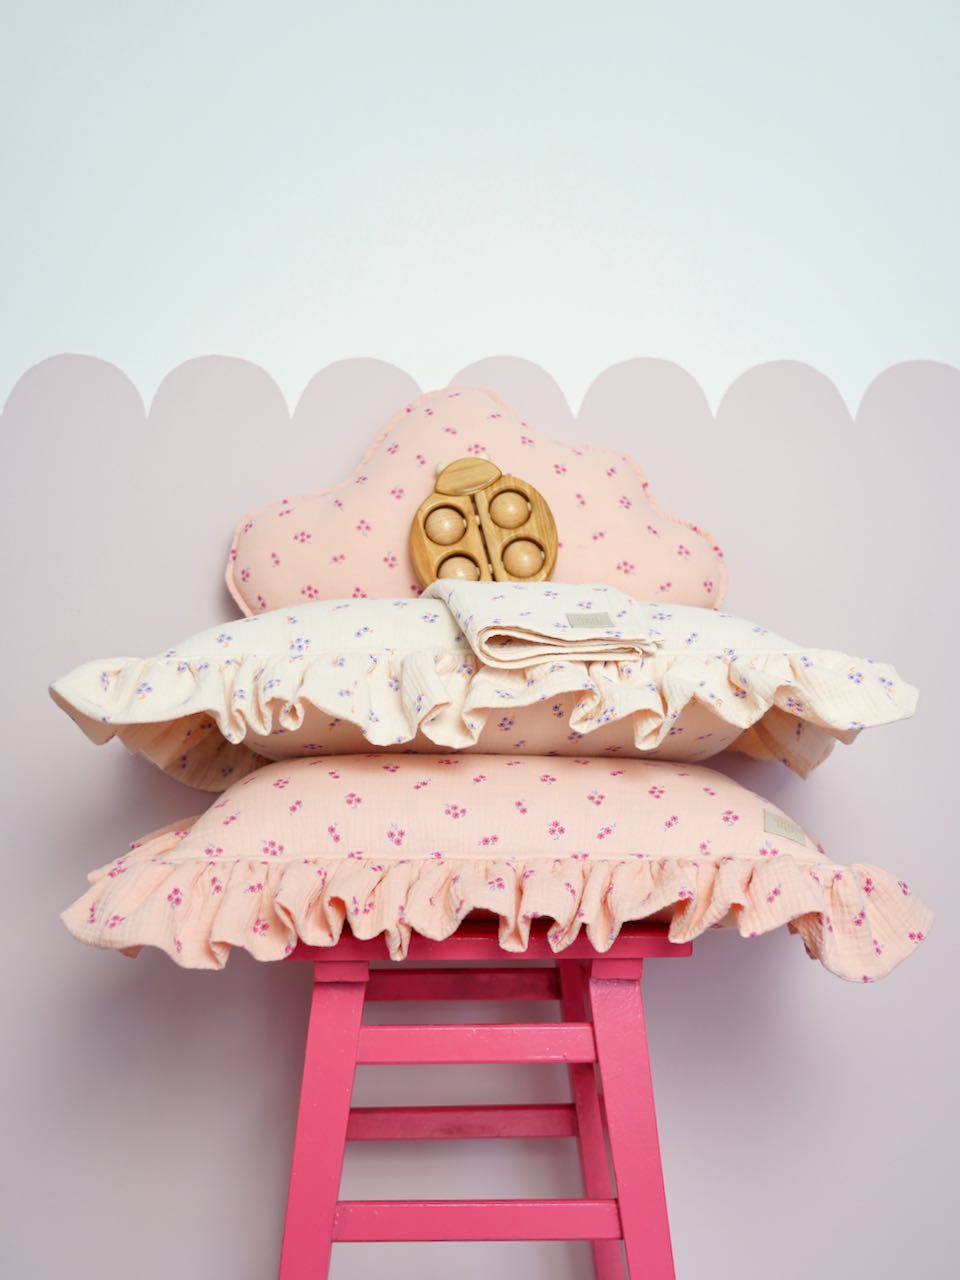 Pillow with Frill "Pink forget-me-not" Muslin | Kids Room & Nursery Decor